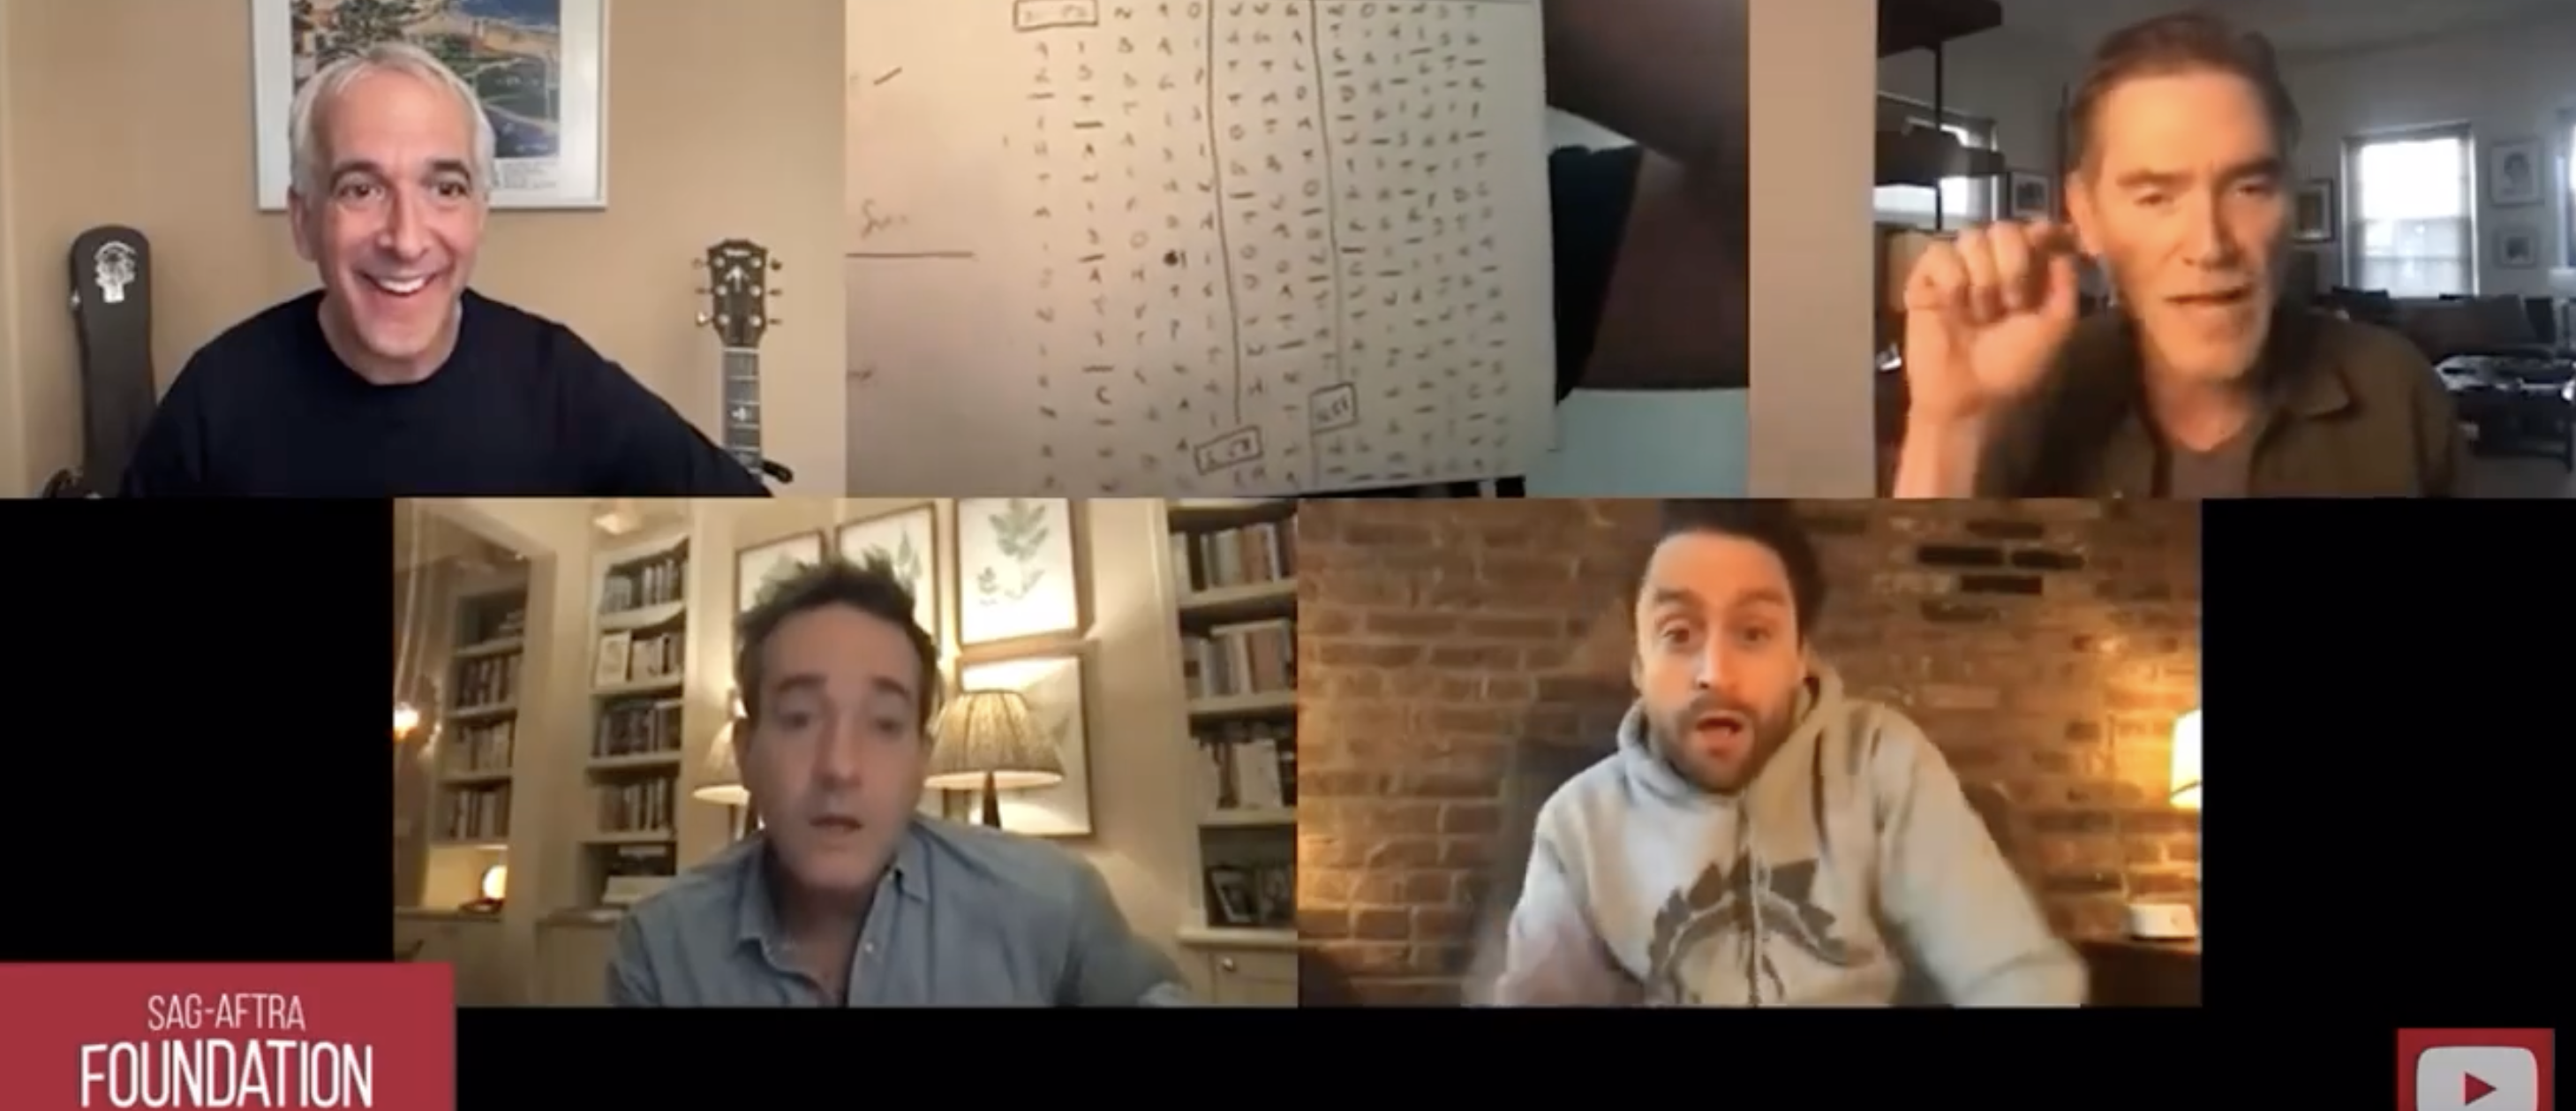 The men in a virtual meeting, with individual home backgrounds, engaging in a discussion